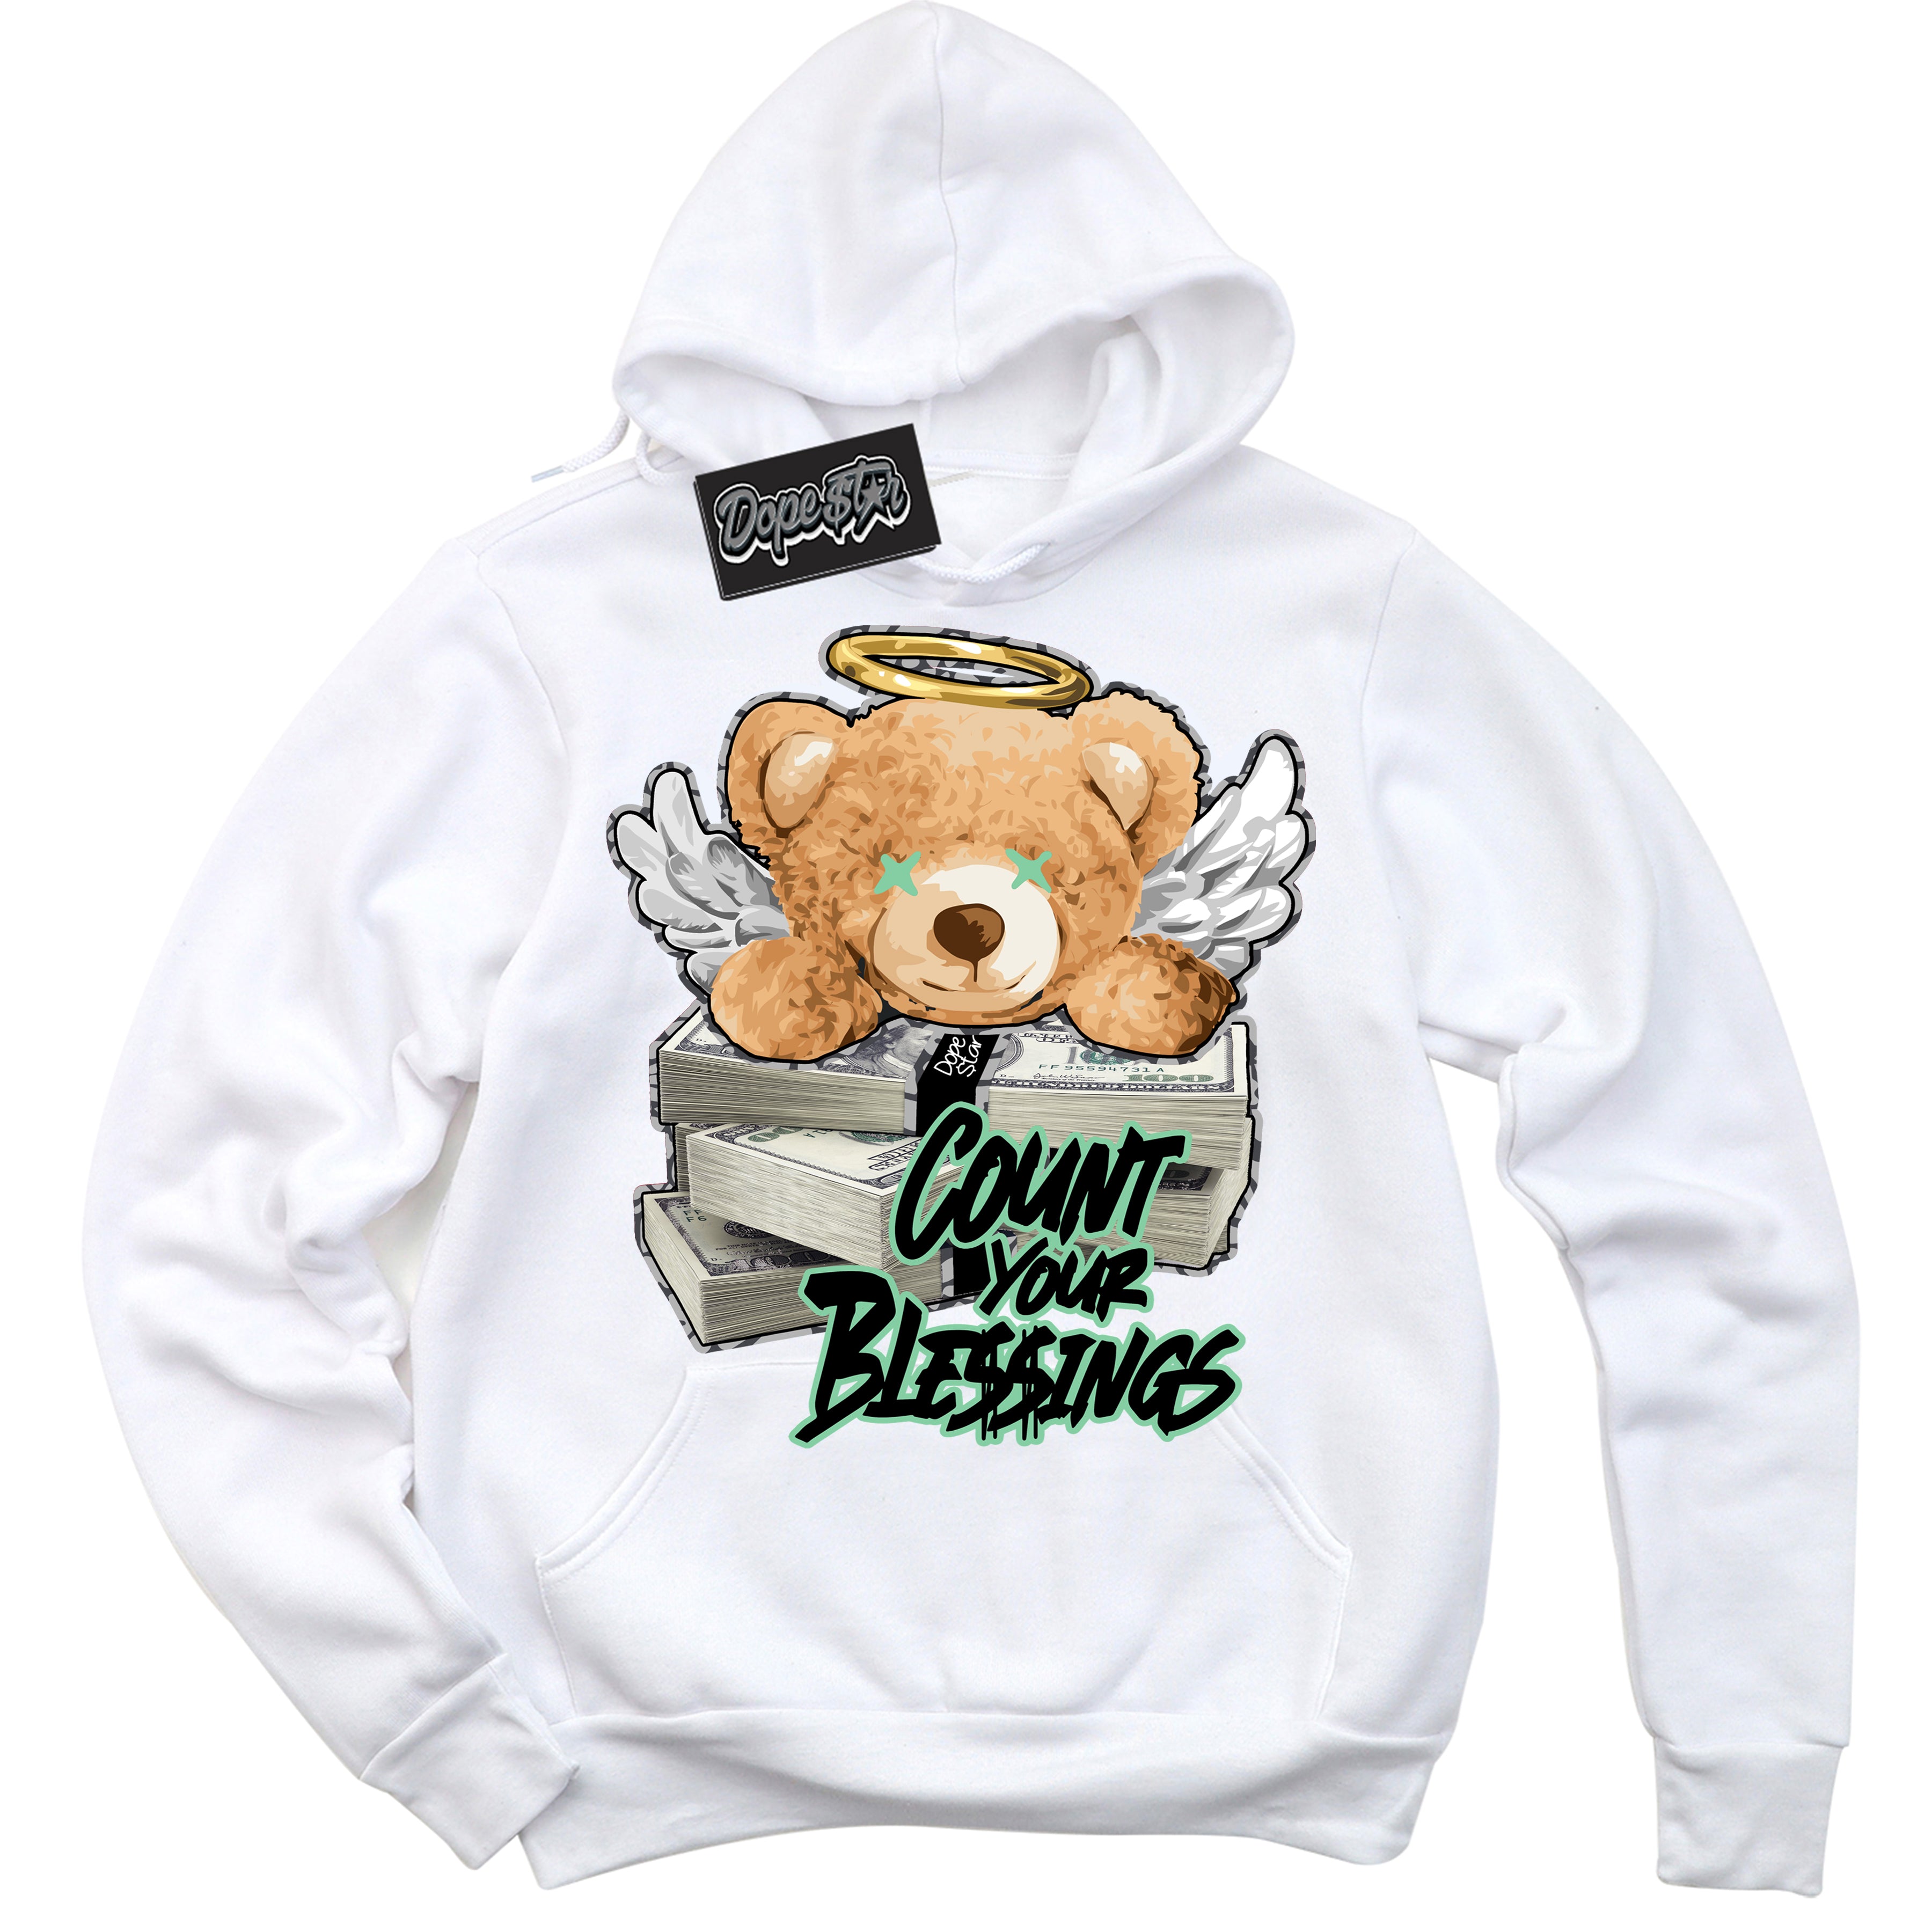 Cool White Graphic DopeStar Hoodie with “ Count Your Blessings “ print, that perfectly matches Green Glow 3s sneakers